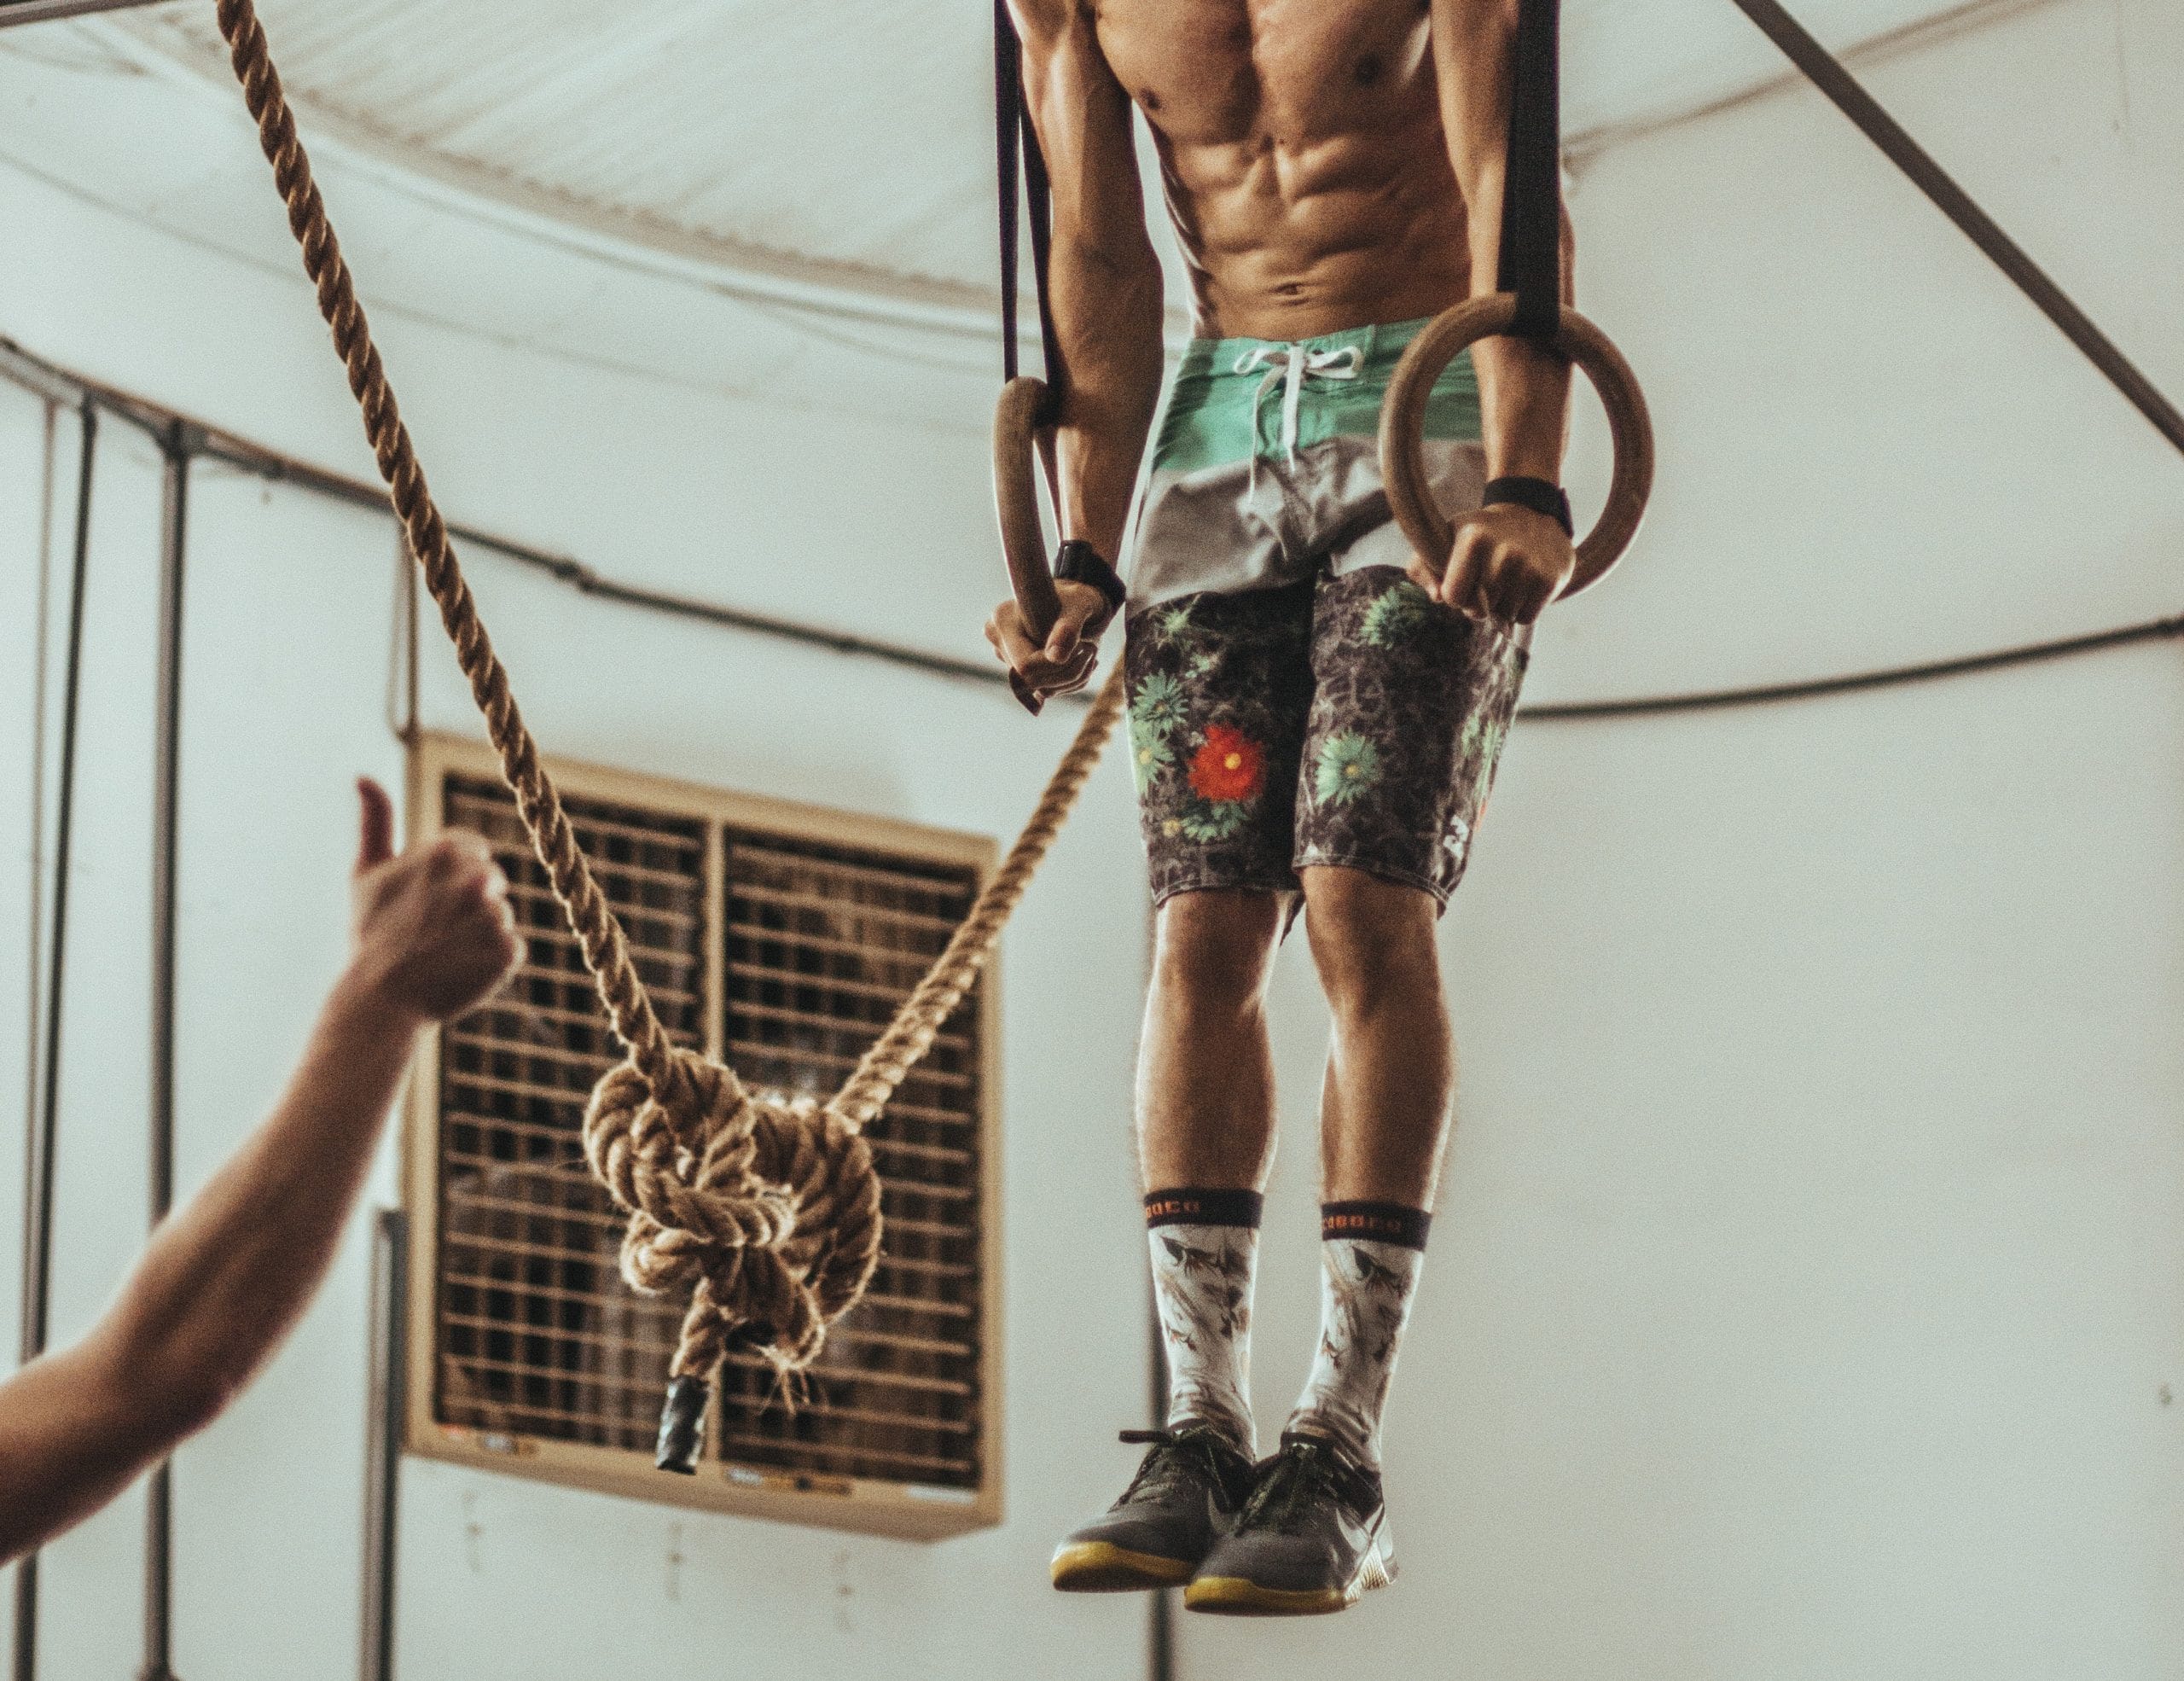 two-a-day training for CrossFit